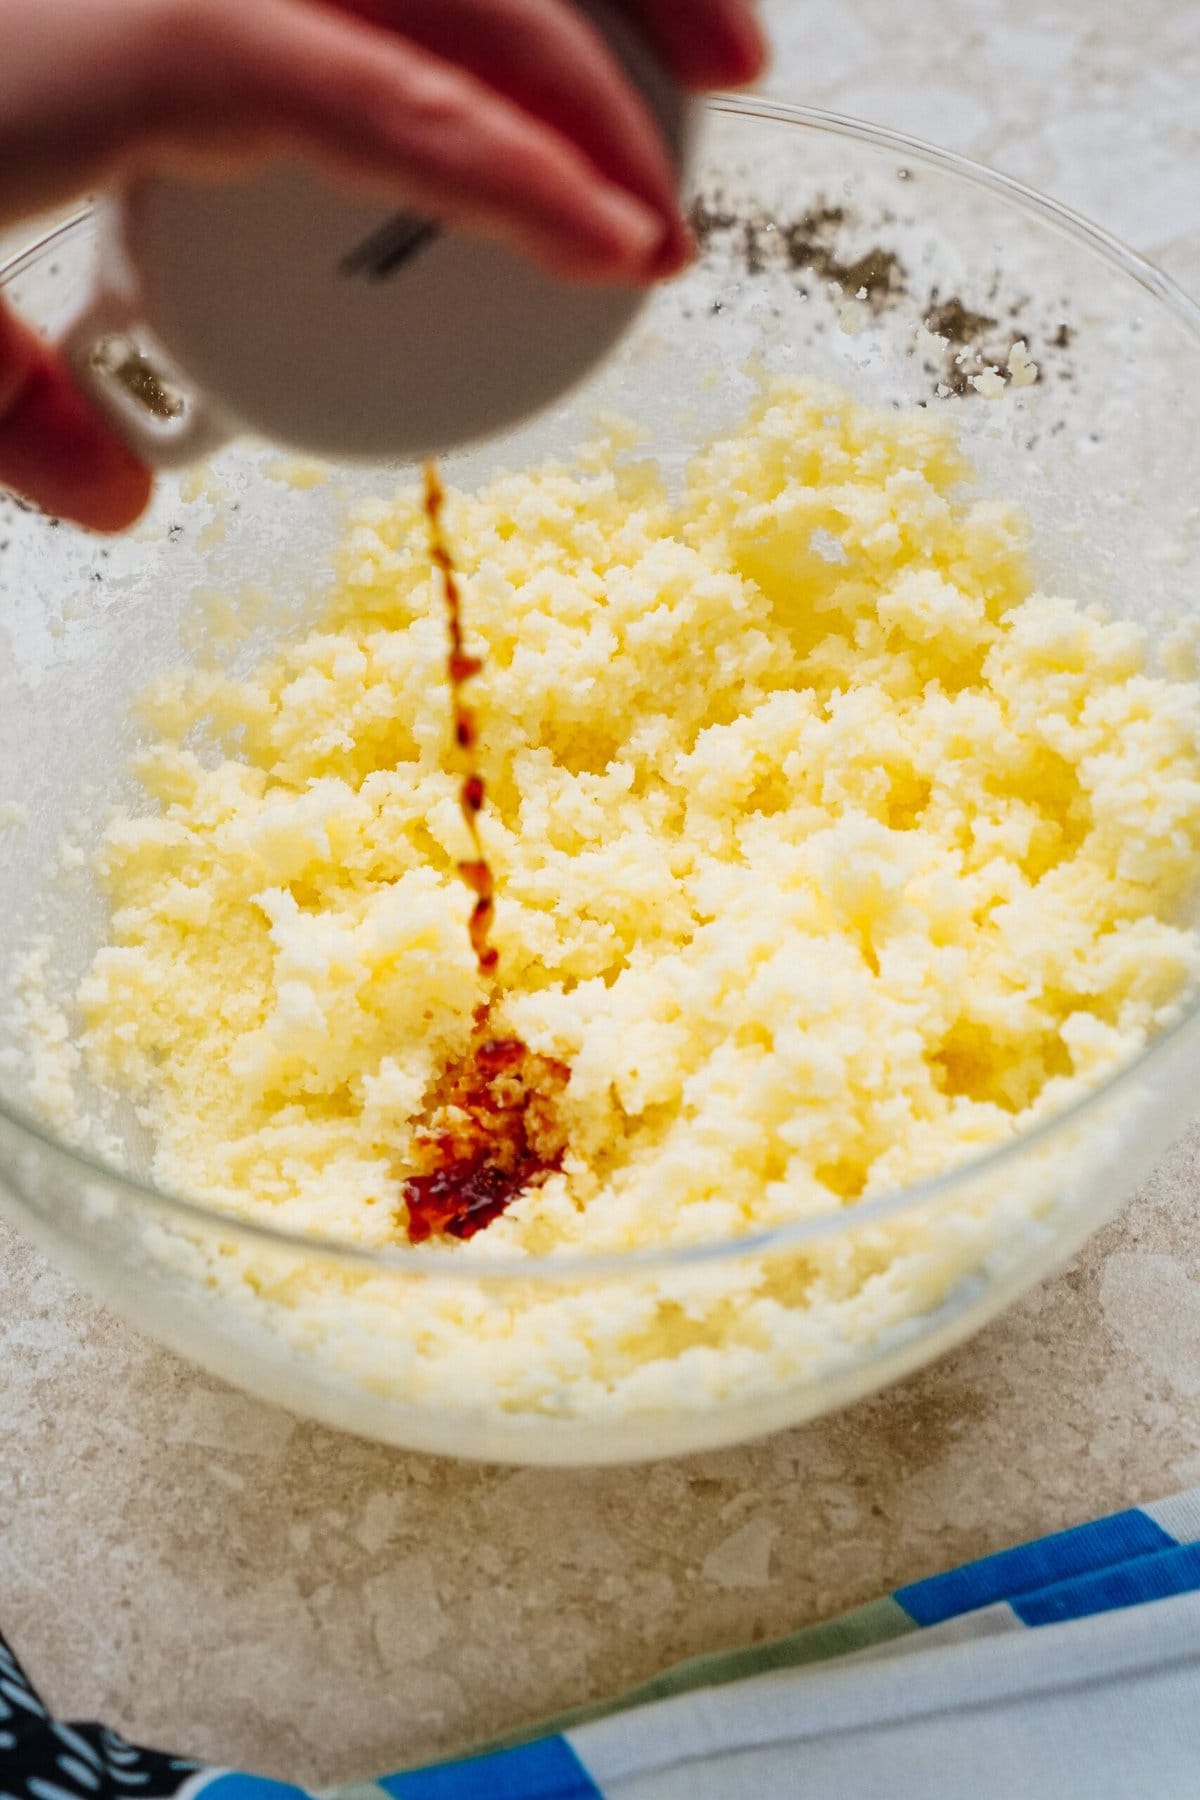 Hand pouring vanilla extract into a bowl of creamed butter and sugar.